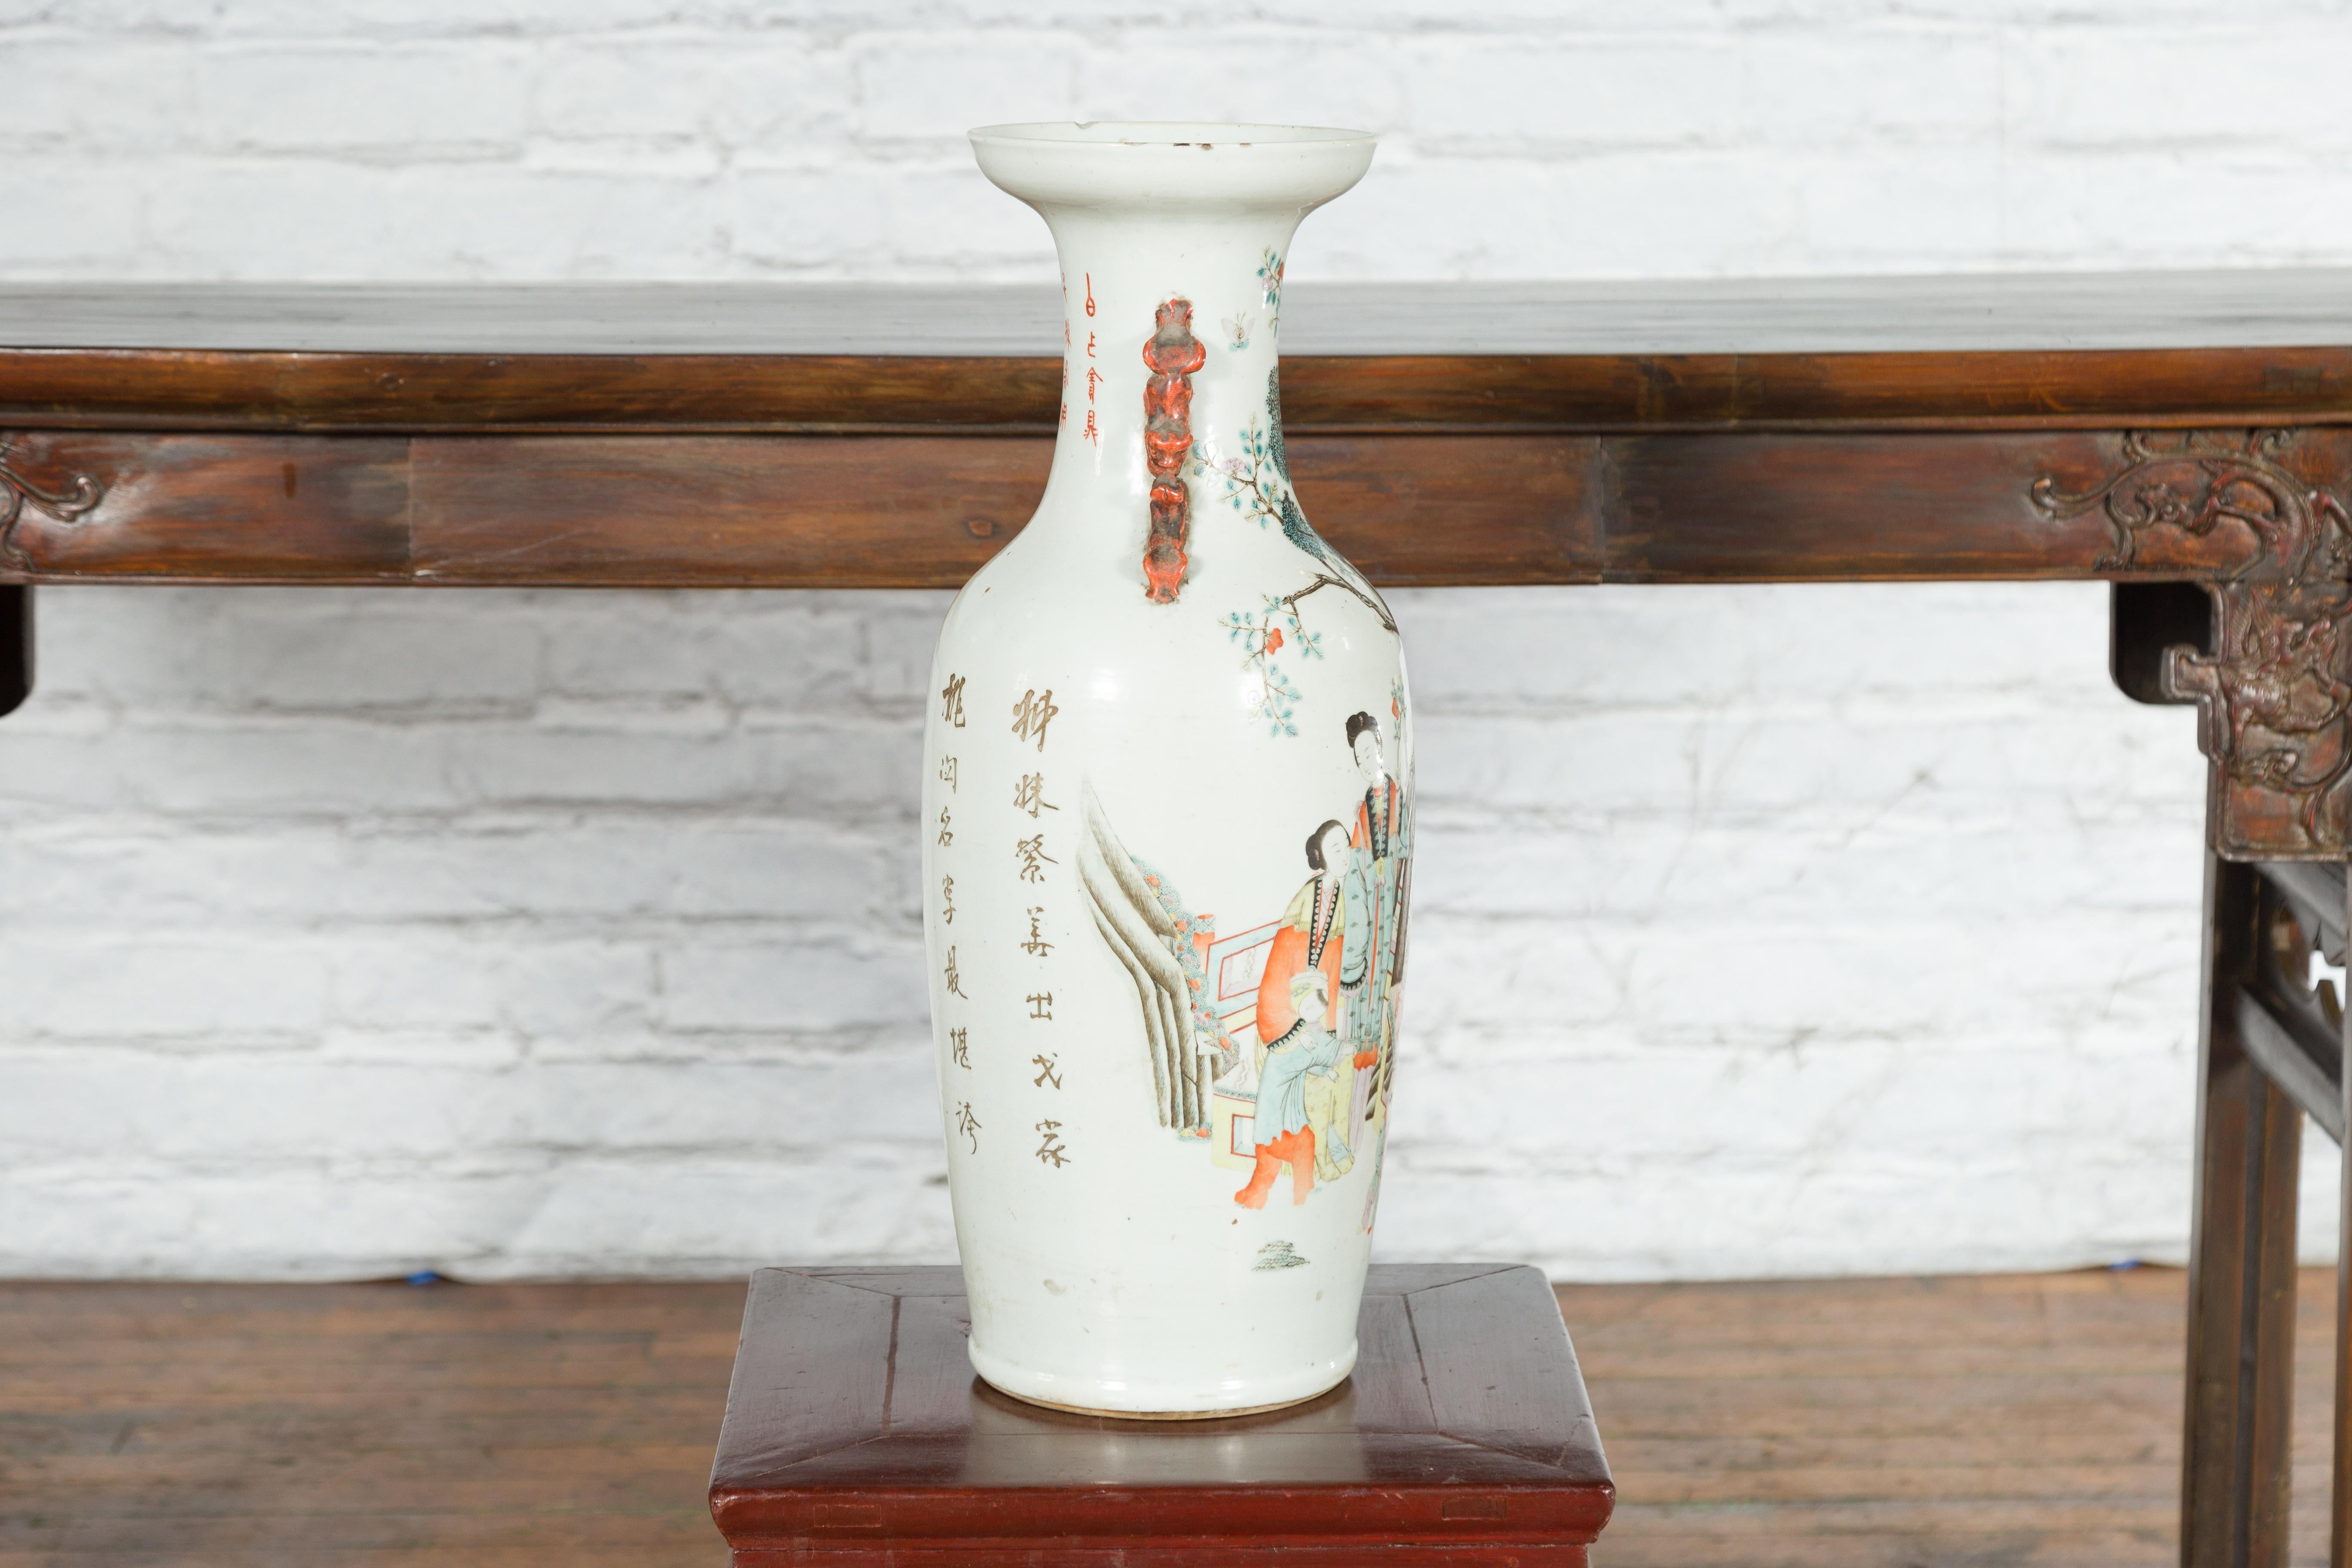 Chinese Qing Porcelain Vase with Hand-Painted Figures and Calligraphy Motifs For Sale 6